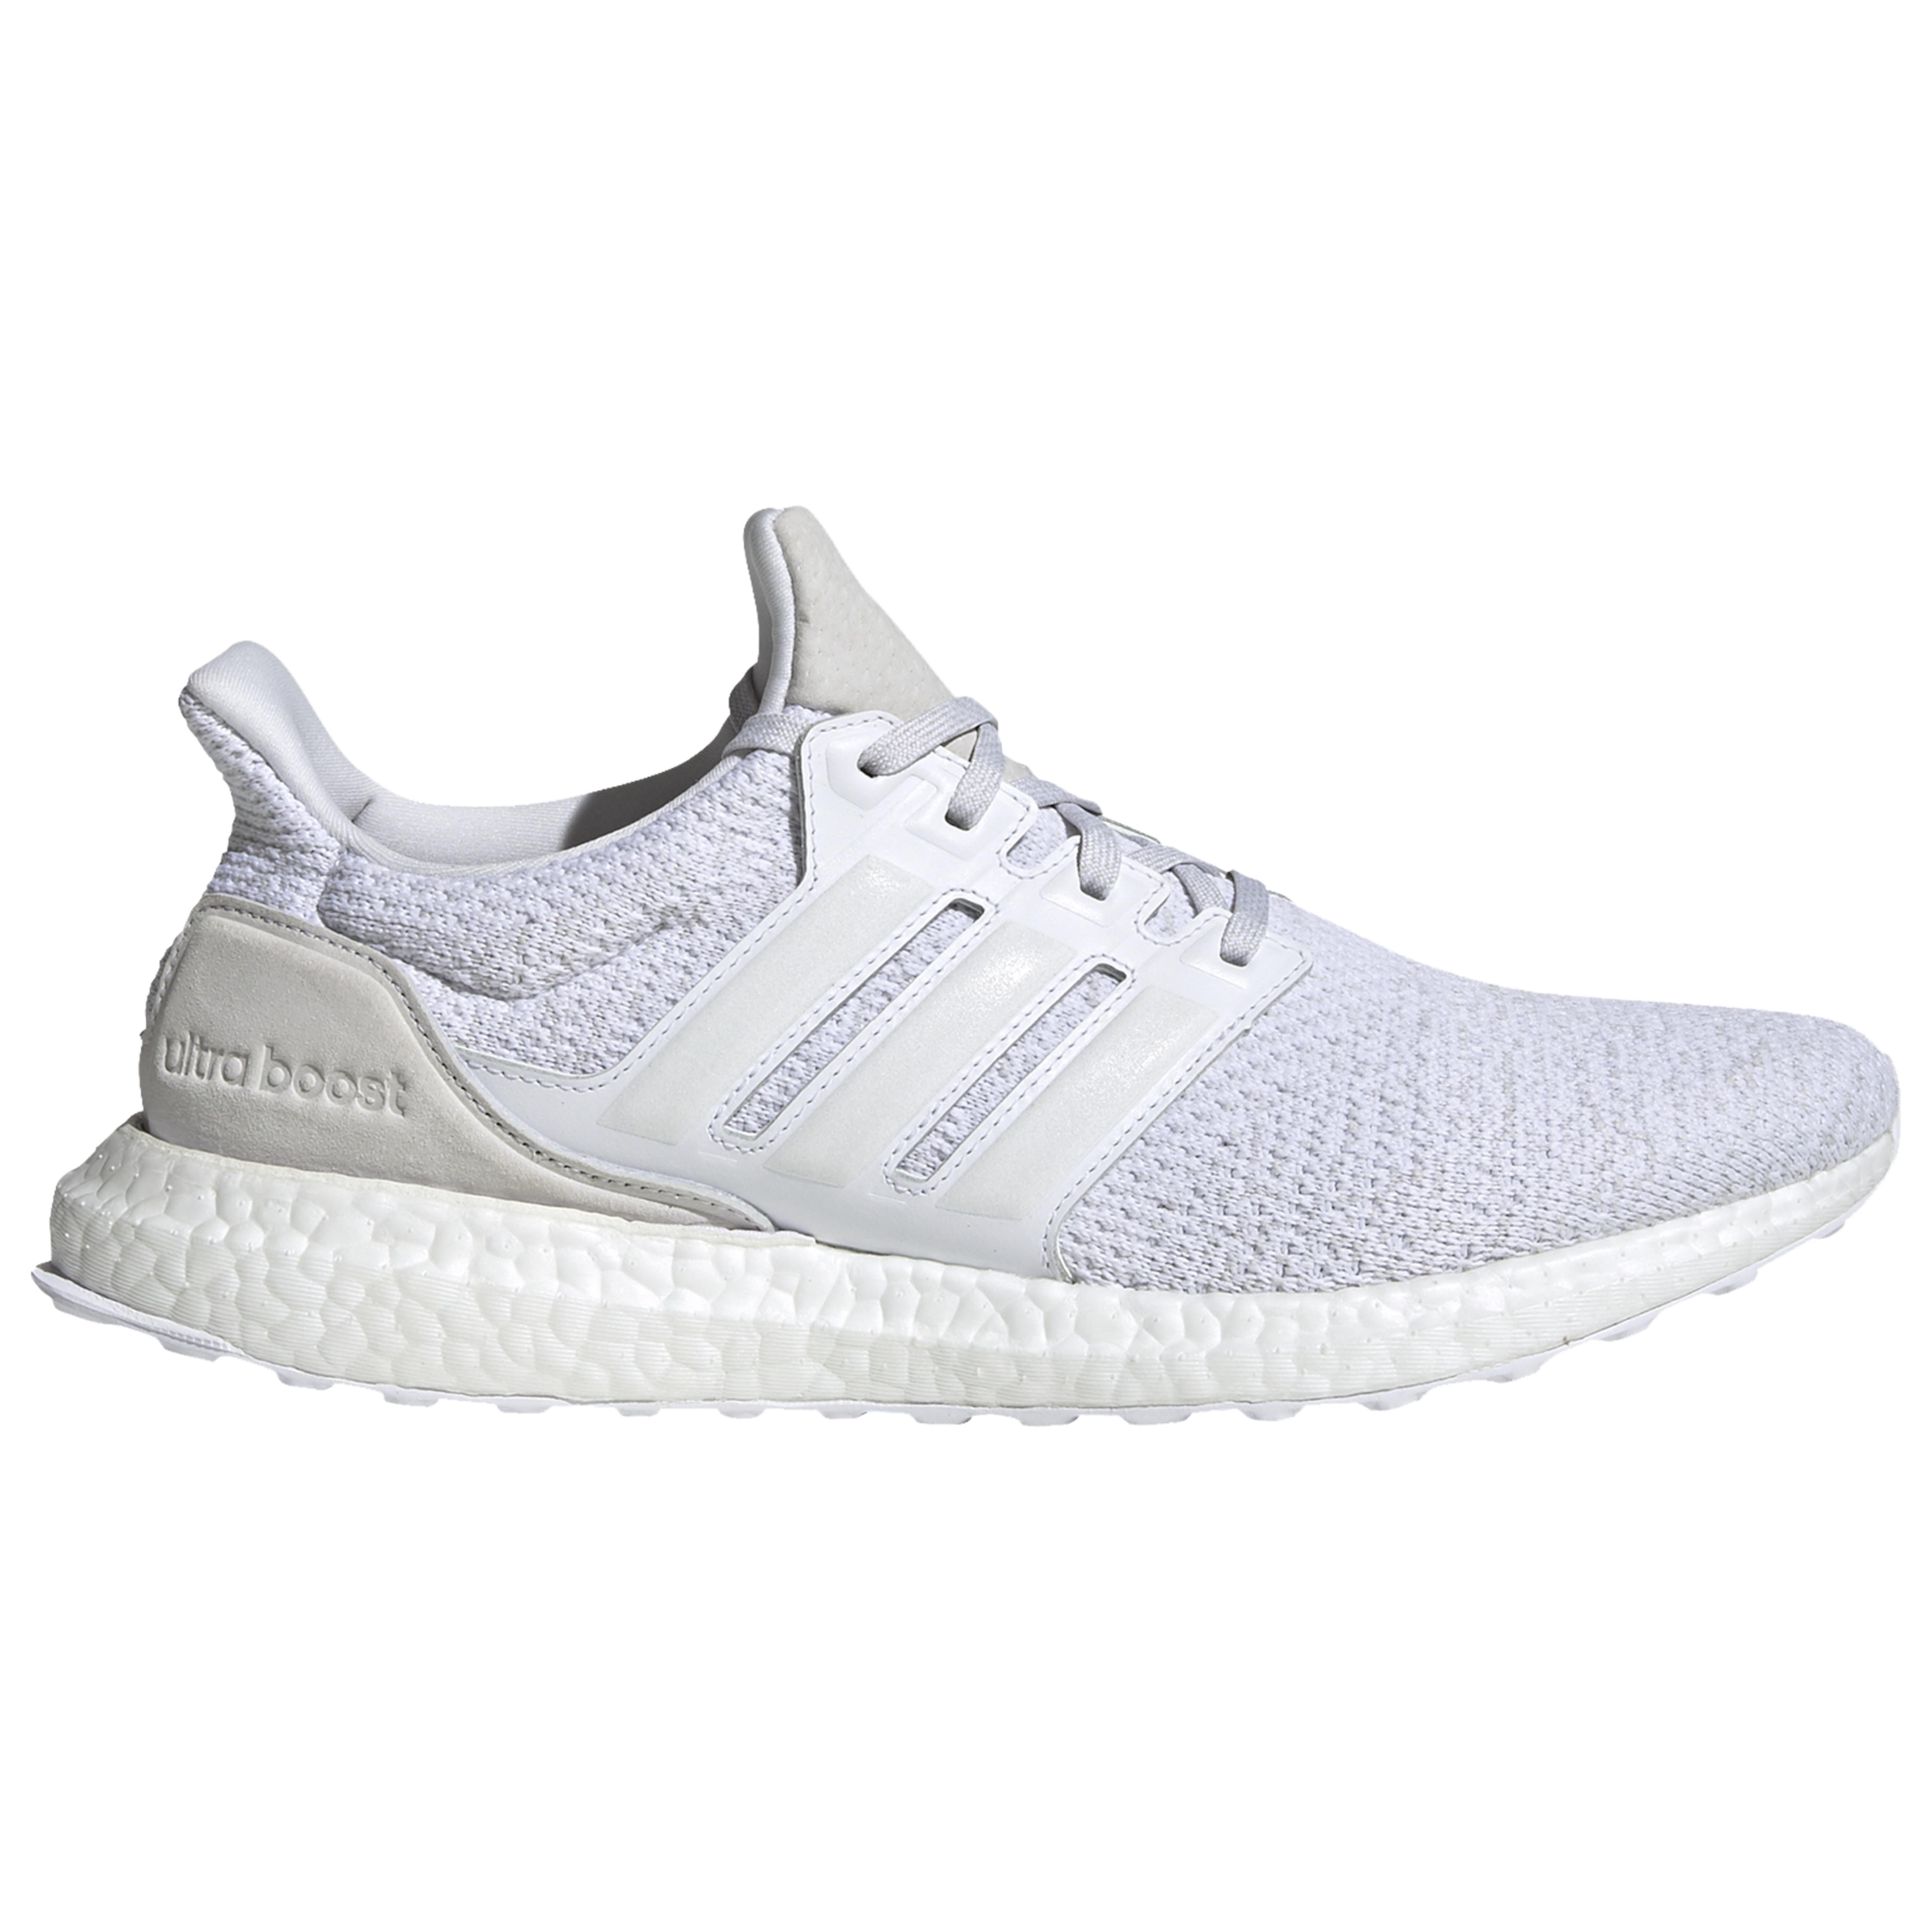 Adidas Rubber Ultraboost Dna Running Shoes In Whitewhitewhite White